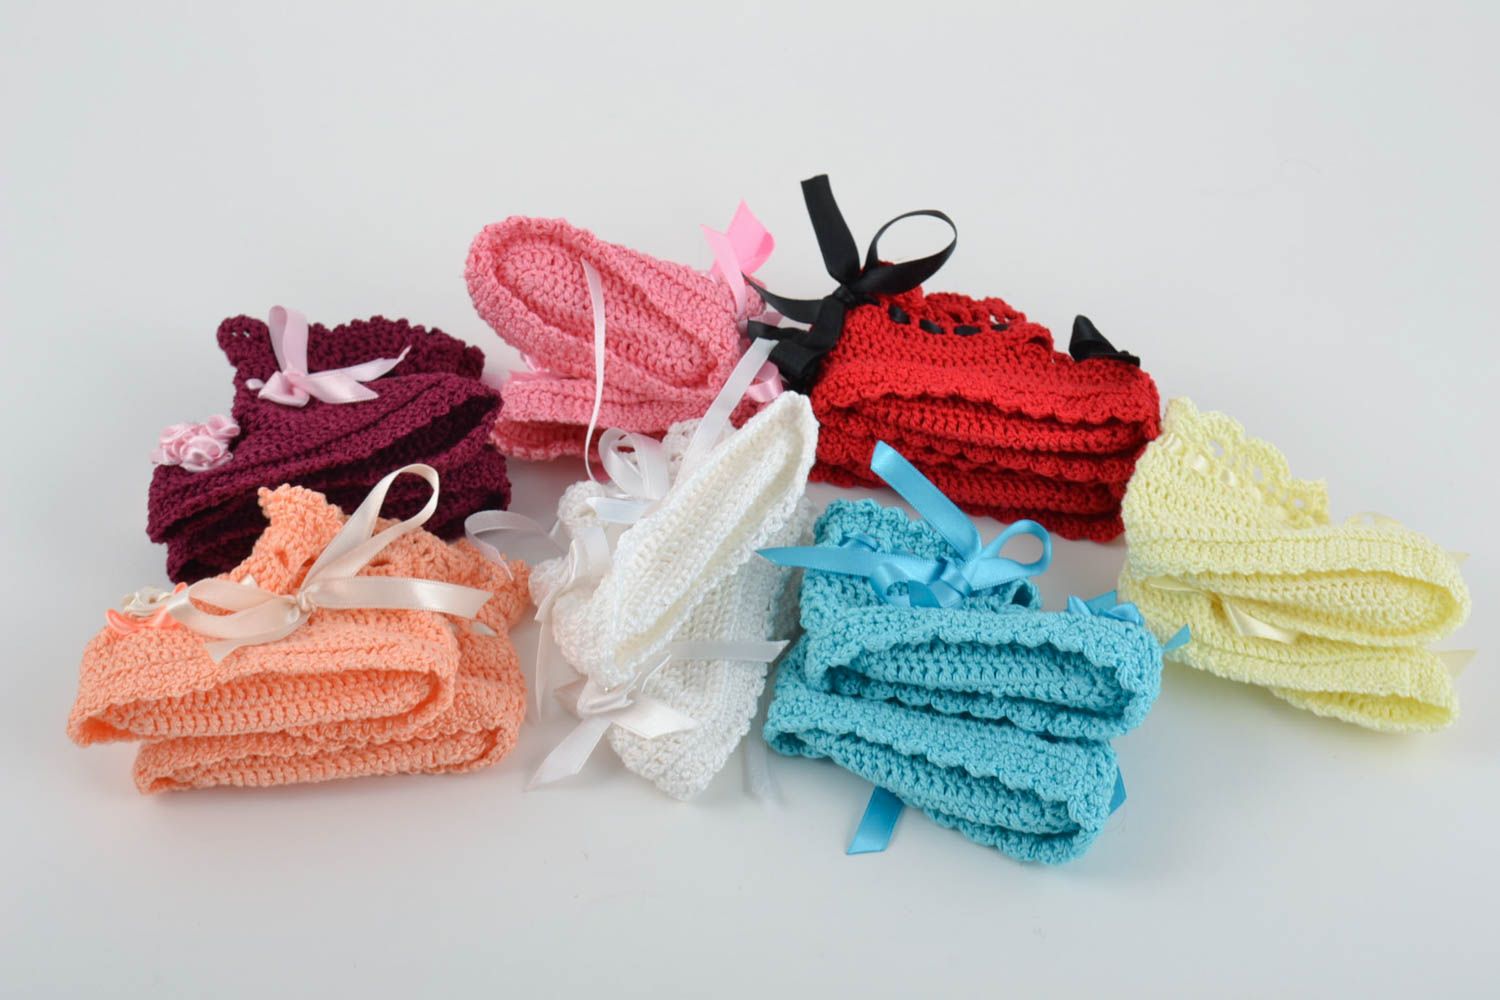 Set of handmade colorful bright crocheted baby booties with ribbons 7 pairs photo 5